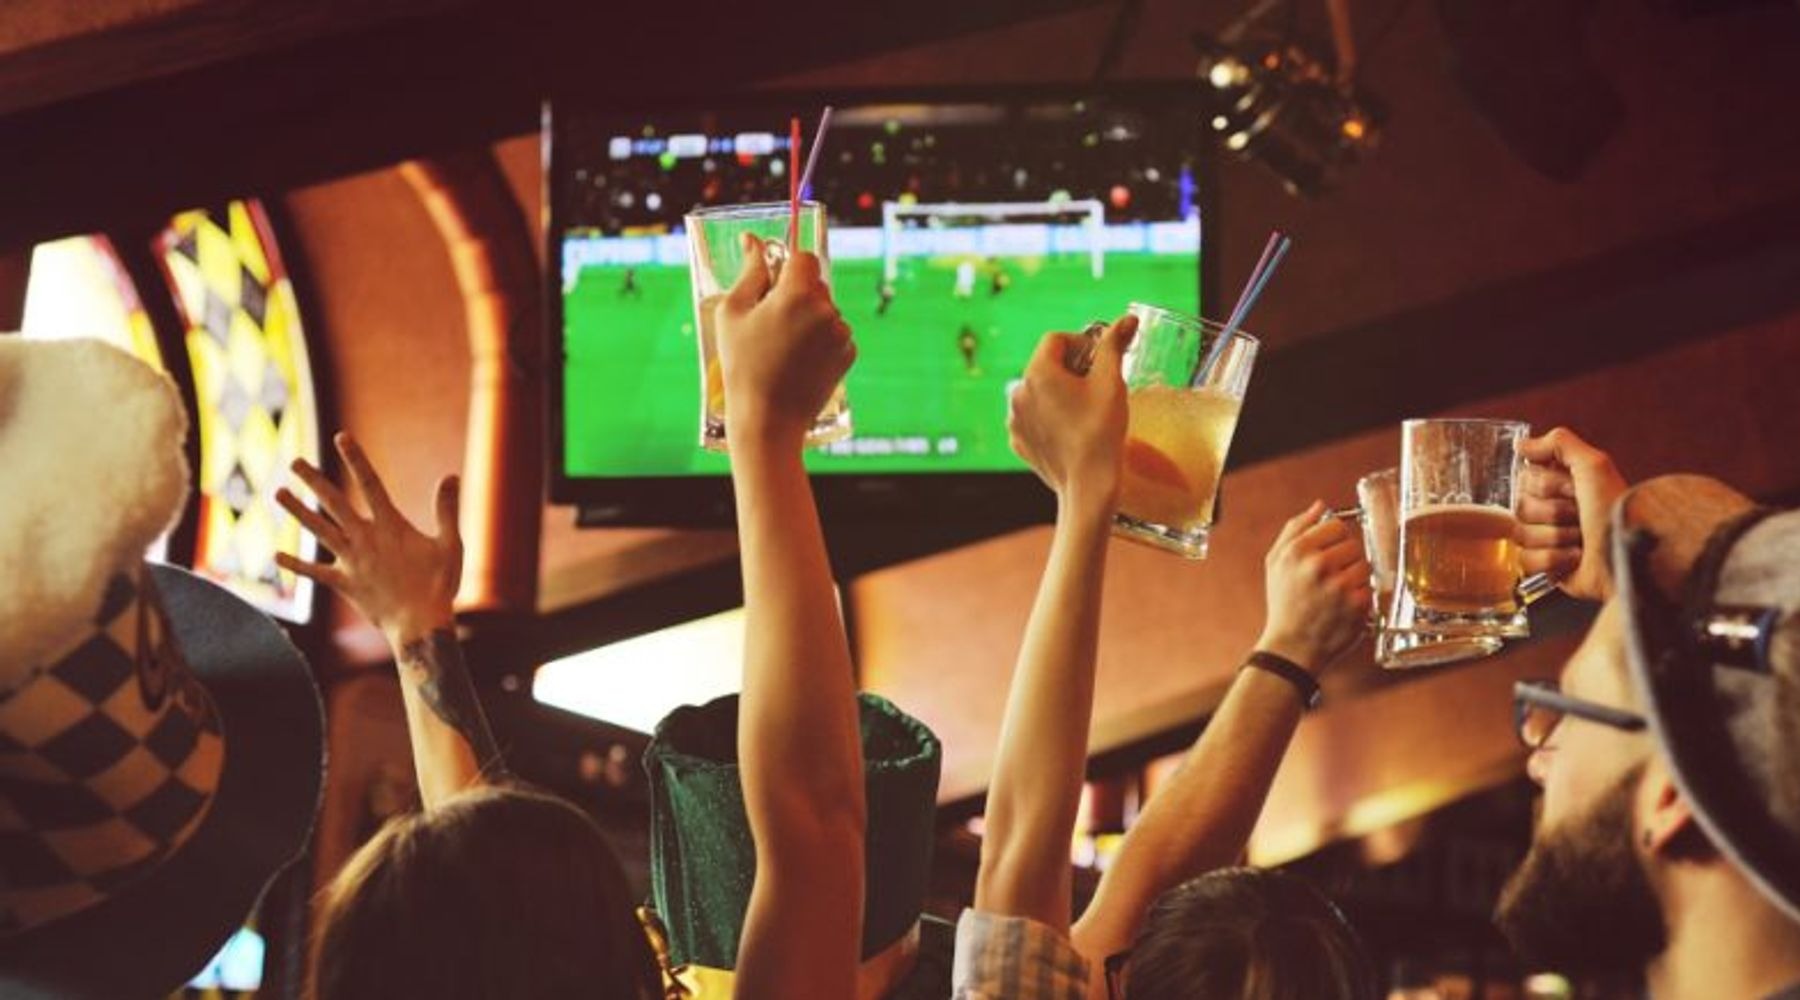 Where can I watch live sports in Singapore?